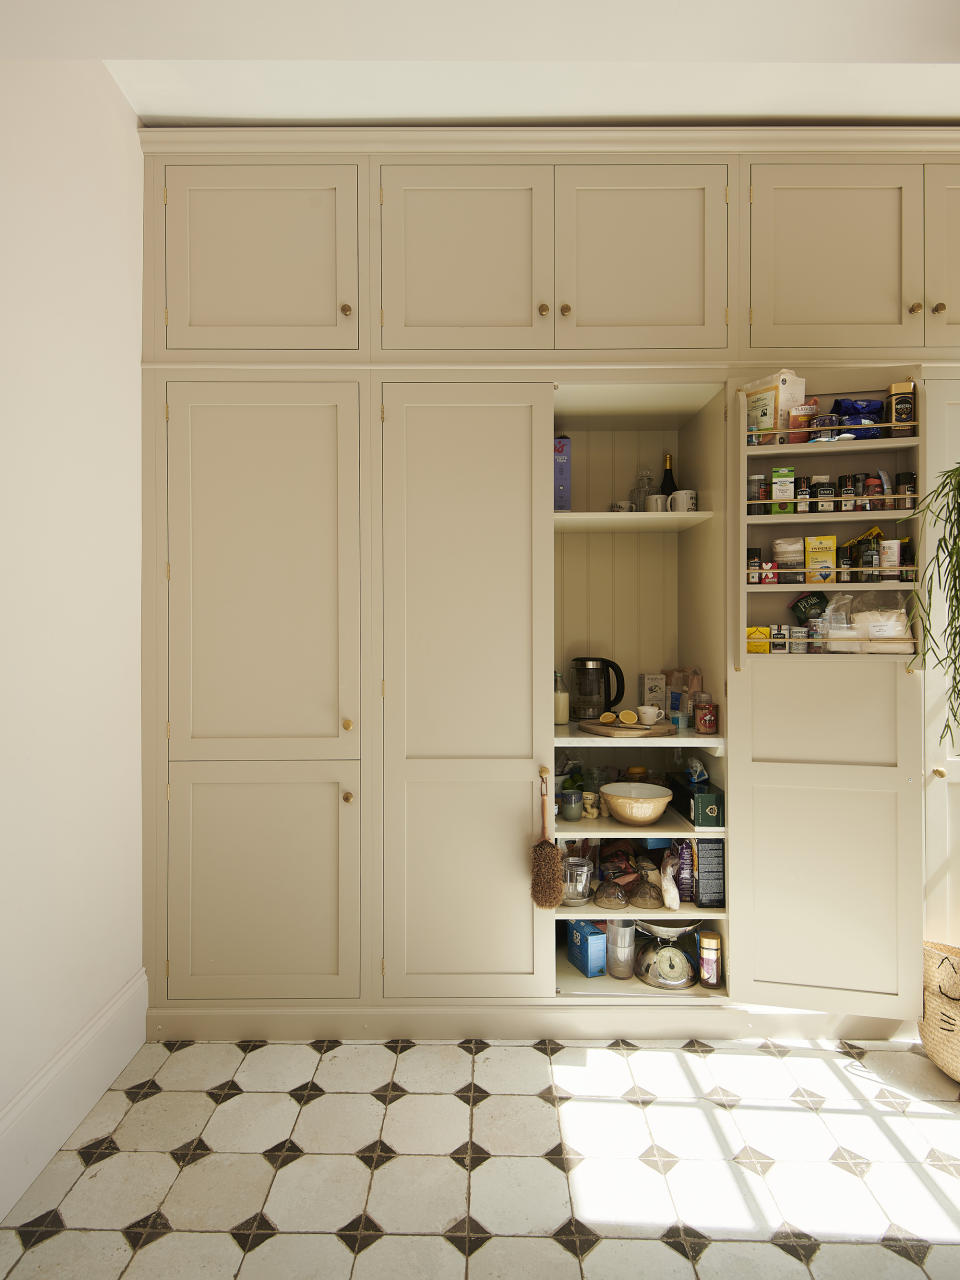 Cream coloured shaker style kitchen cabinets which open onto an appliance garage with door shelving racks